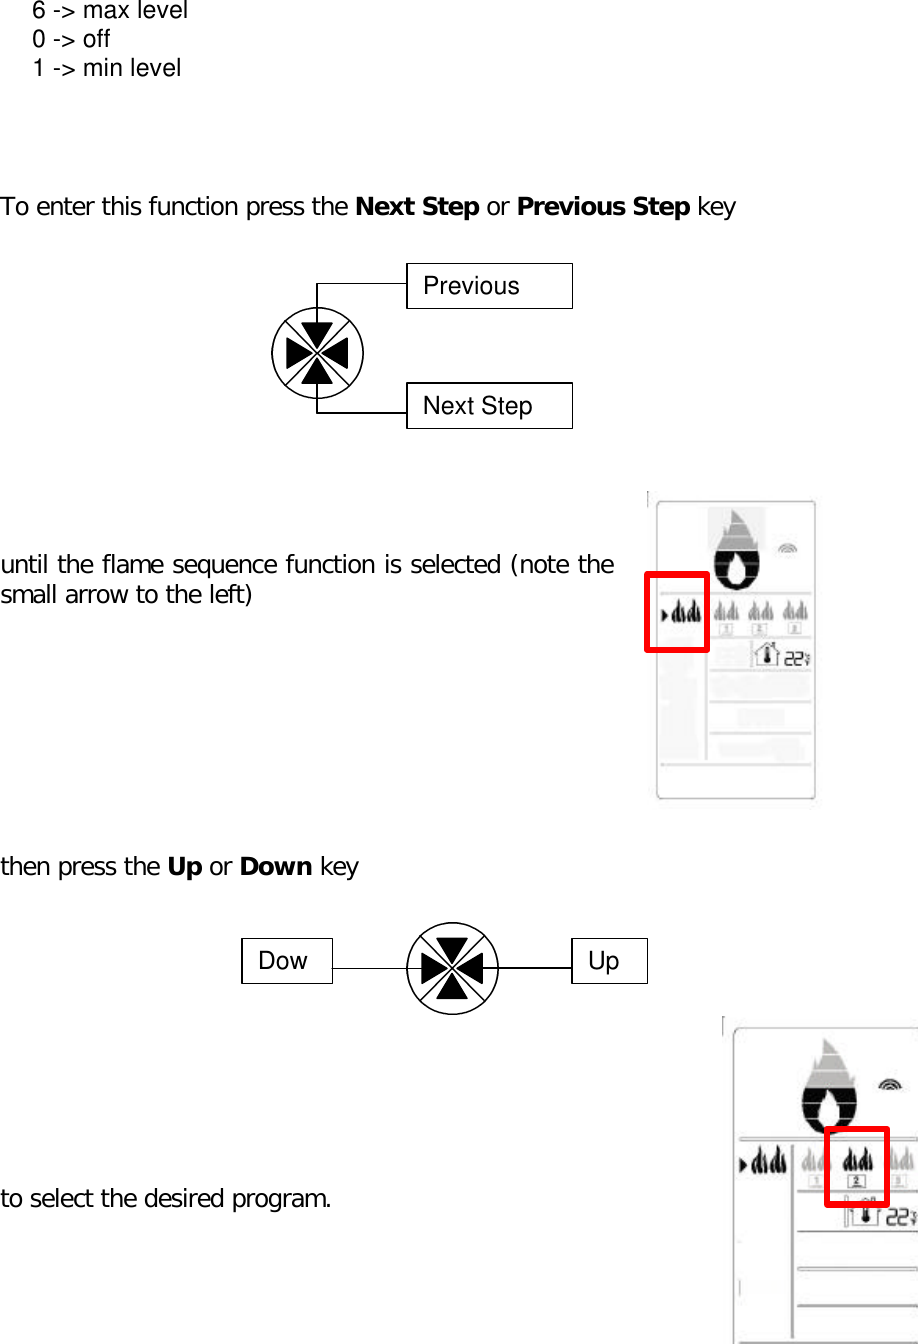 To enter this function press the Next Step or Previous Step keyuntil the flame sequence function is selected (note thesmall arrow to the left)then press the Up or Down keyto select the desired program.PreviousNext StepDowUp6 -&gt; max level0 -&gt; off1 -&gt; min level